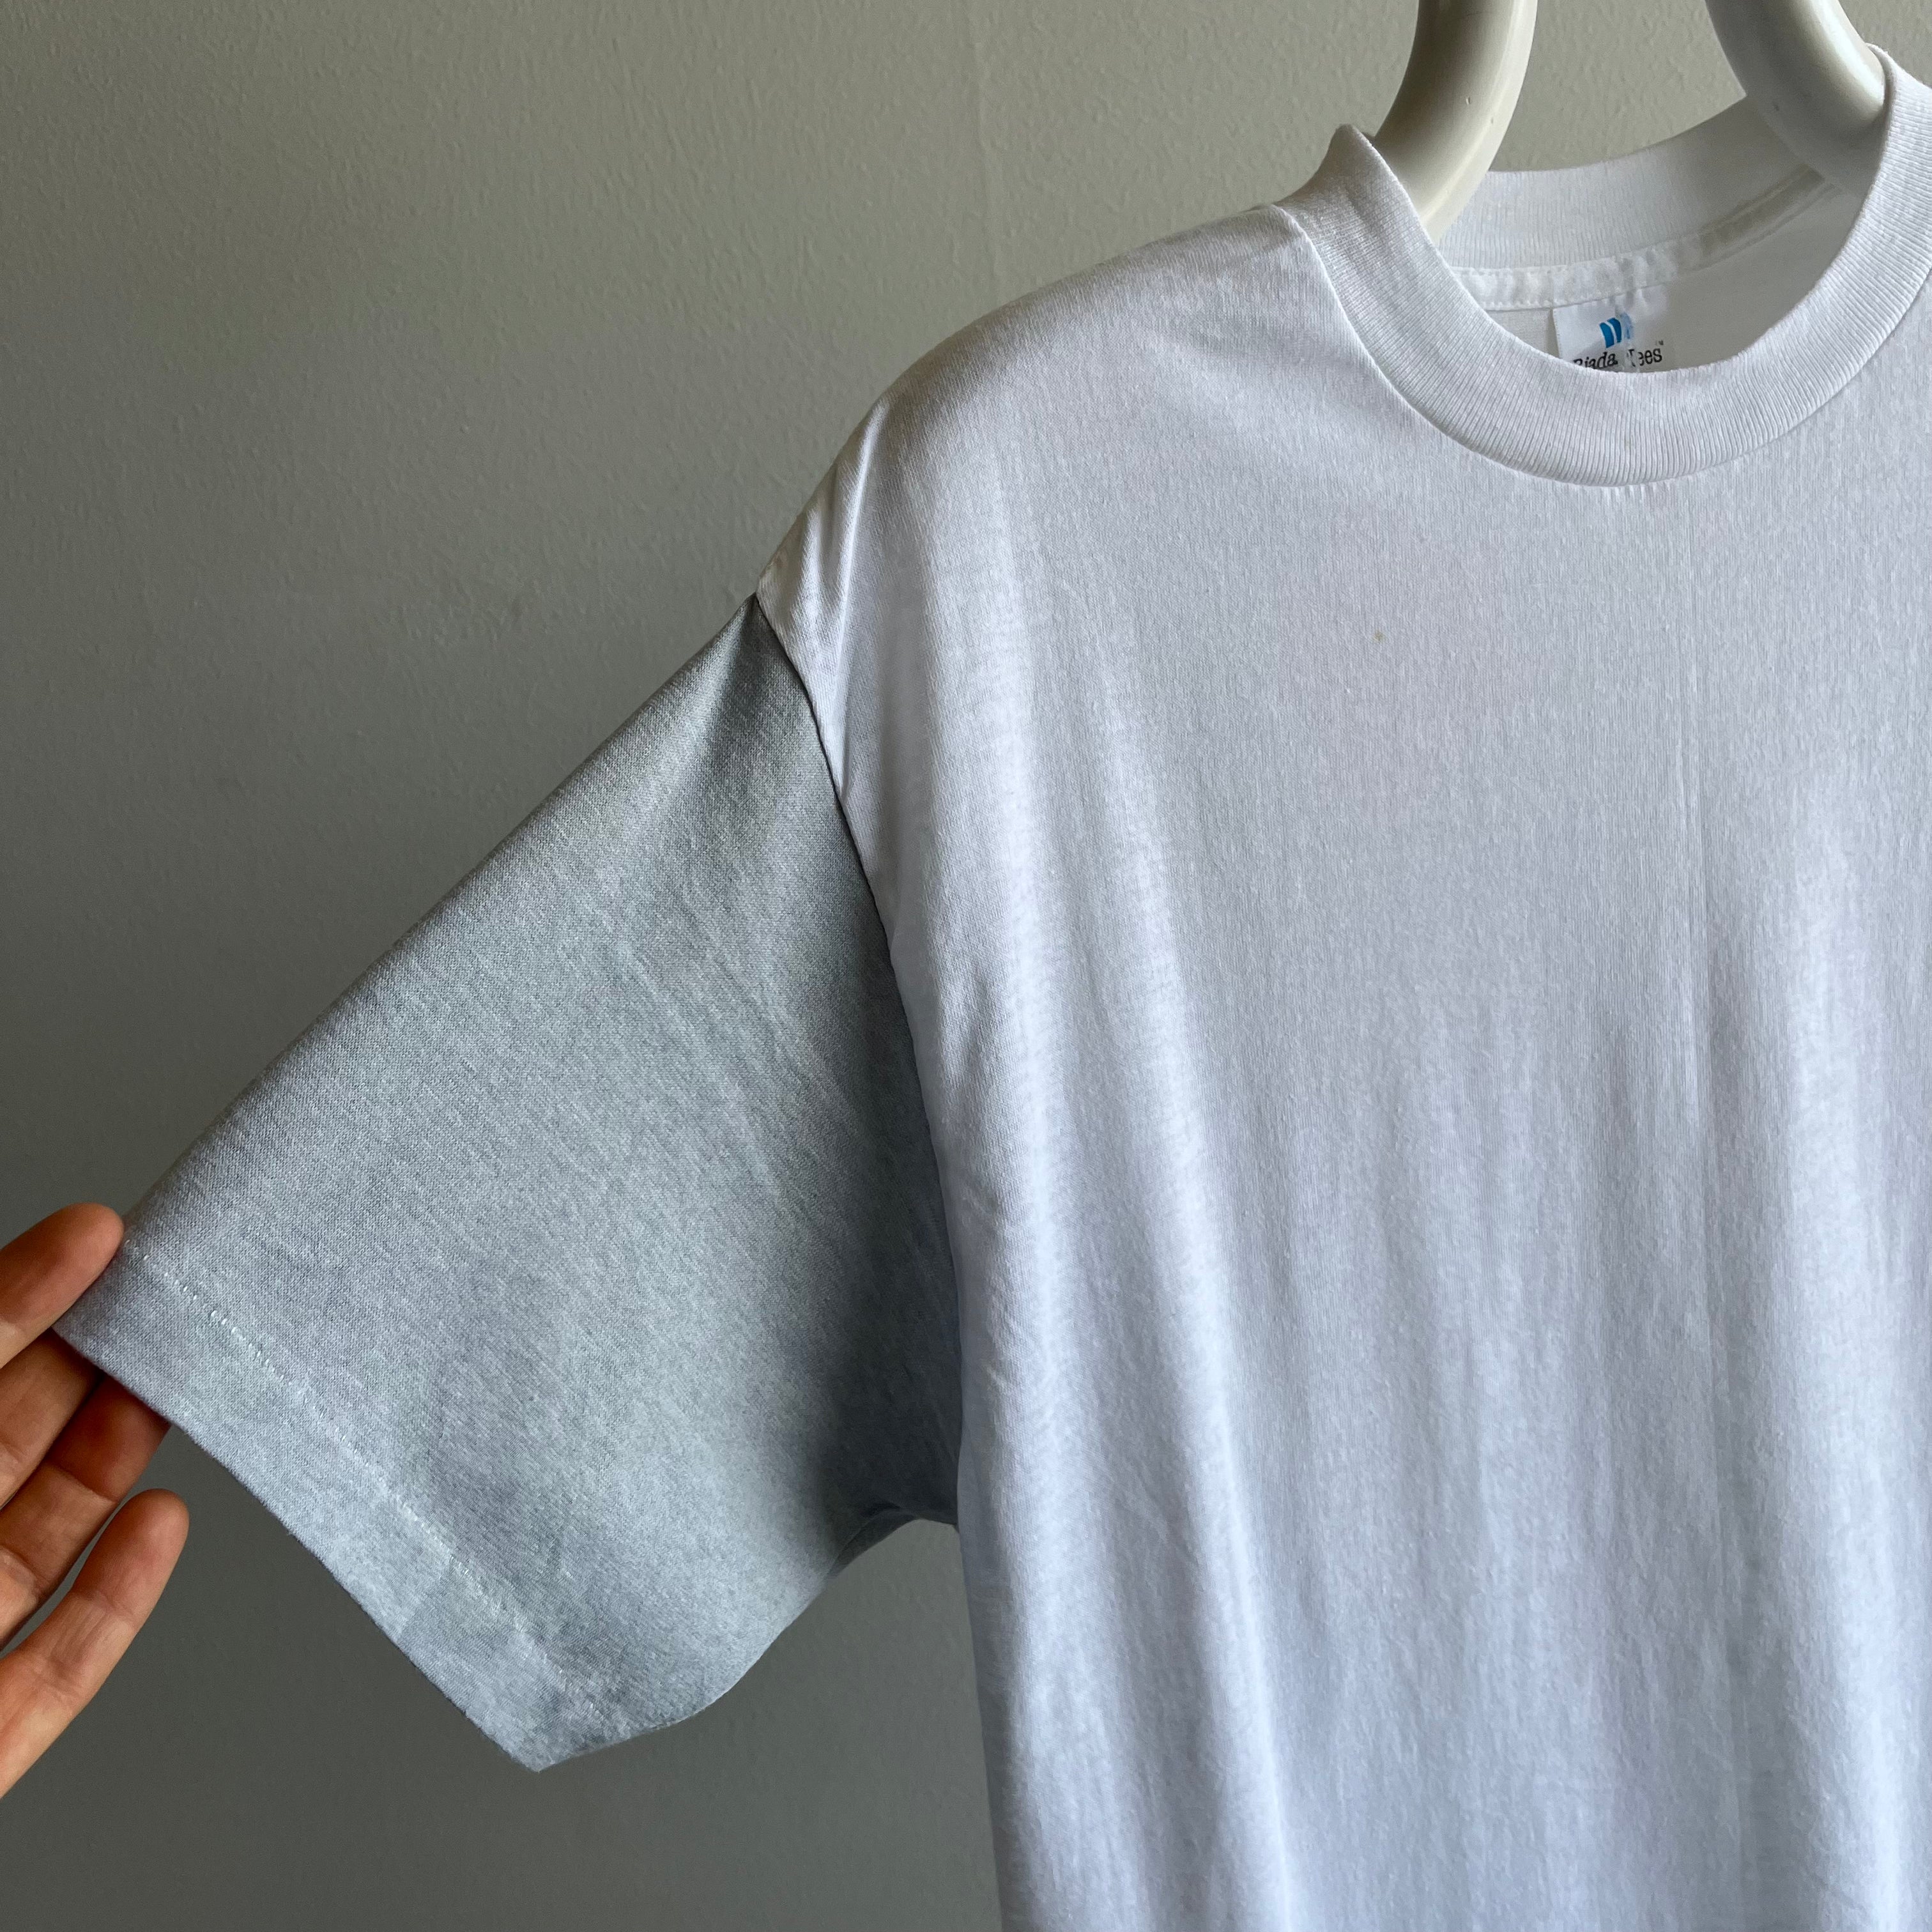 1980s Never Worn White and Gray Color Block T-Shirt